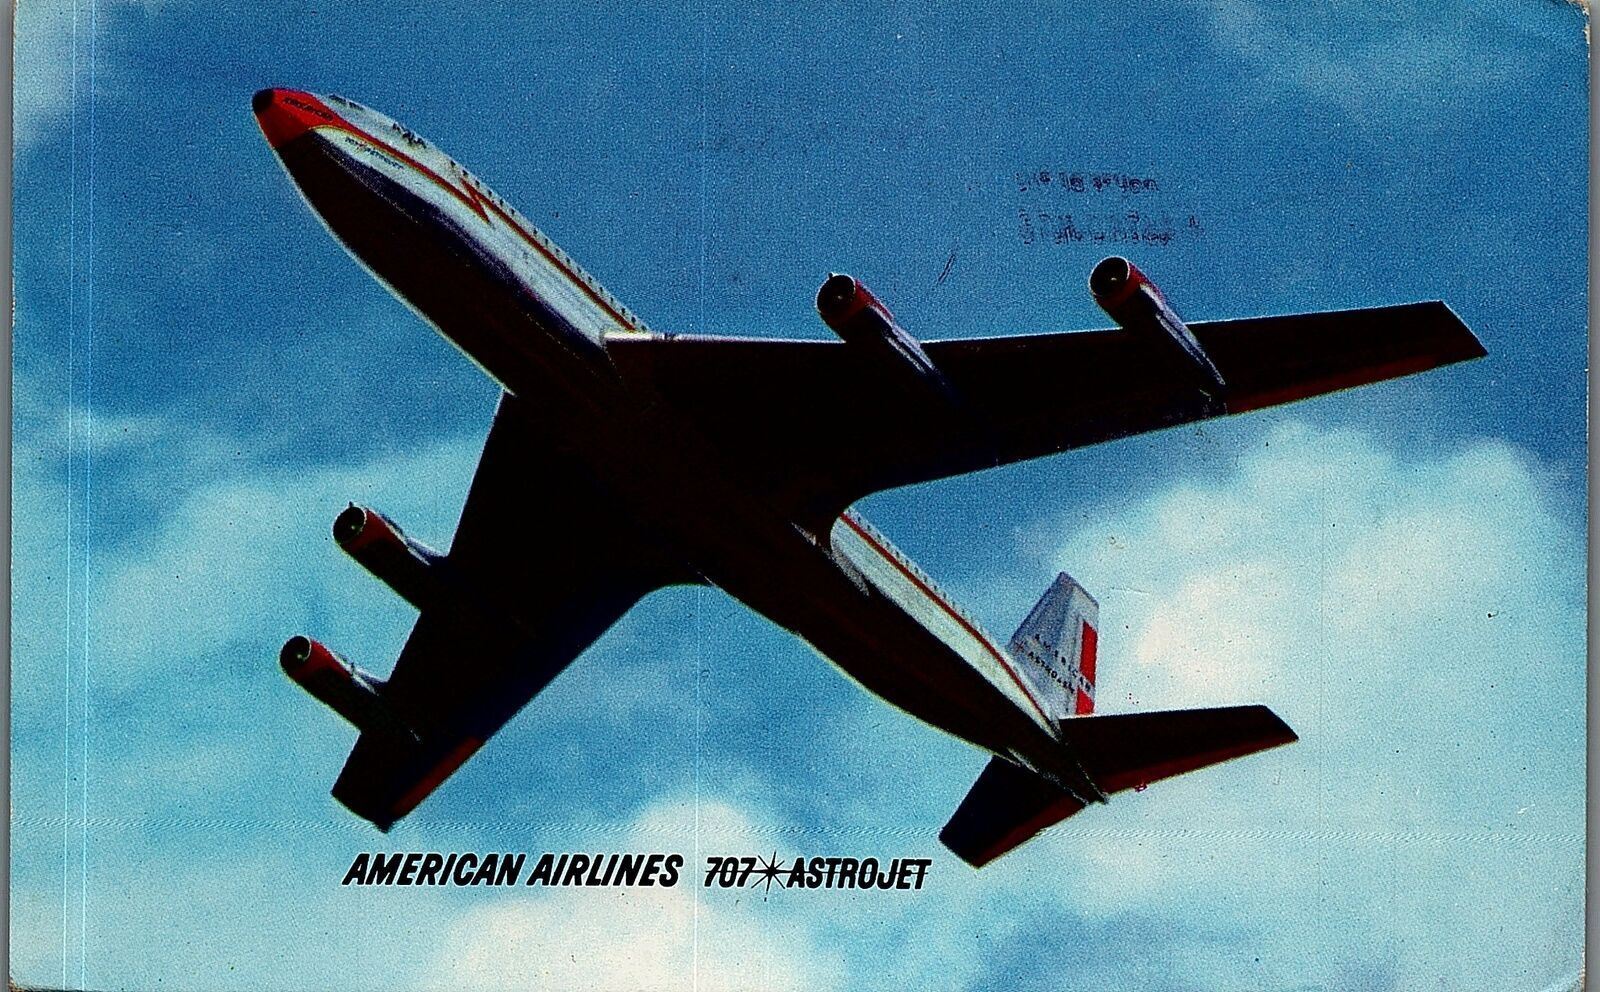 VINTAGE AMERICAN AIRLINES 707 ASTROJET AIRPLANE PHOTOCHROME POSTCARD 38-157